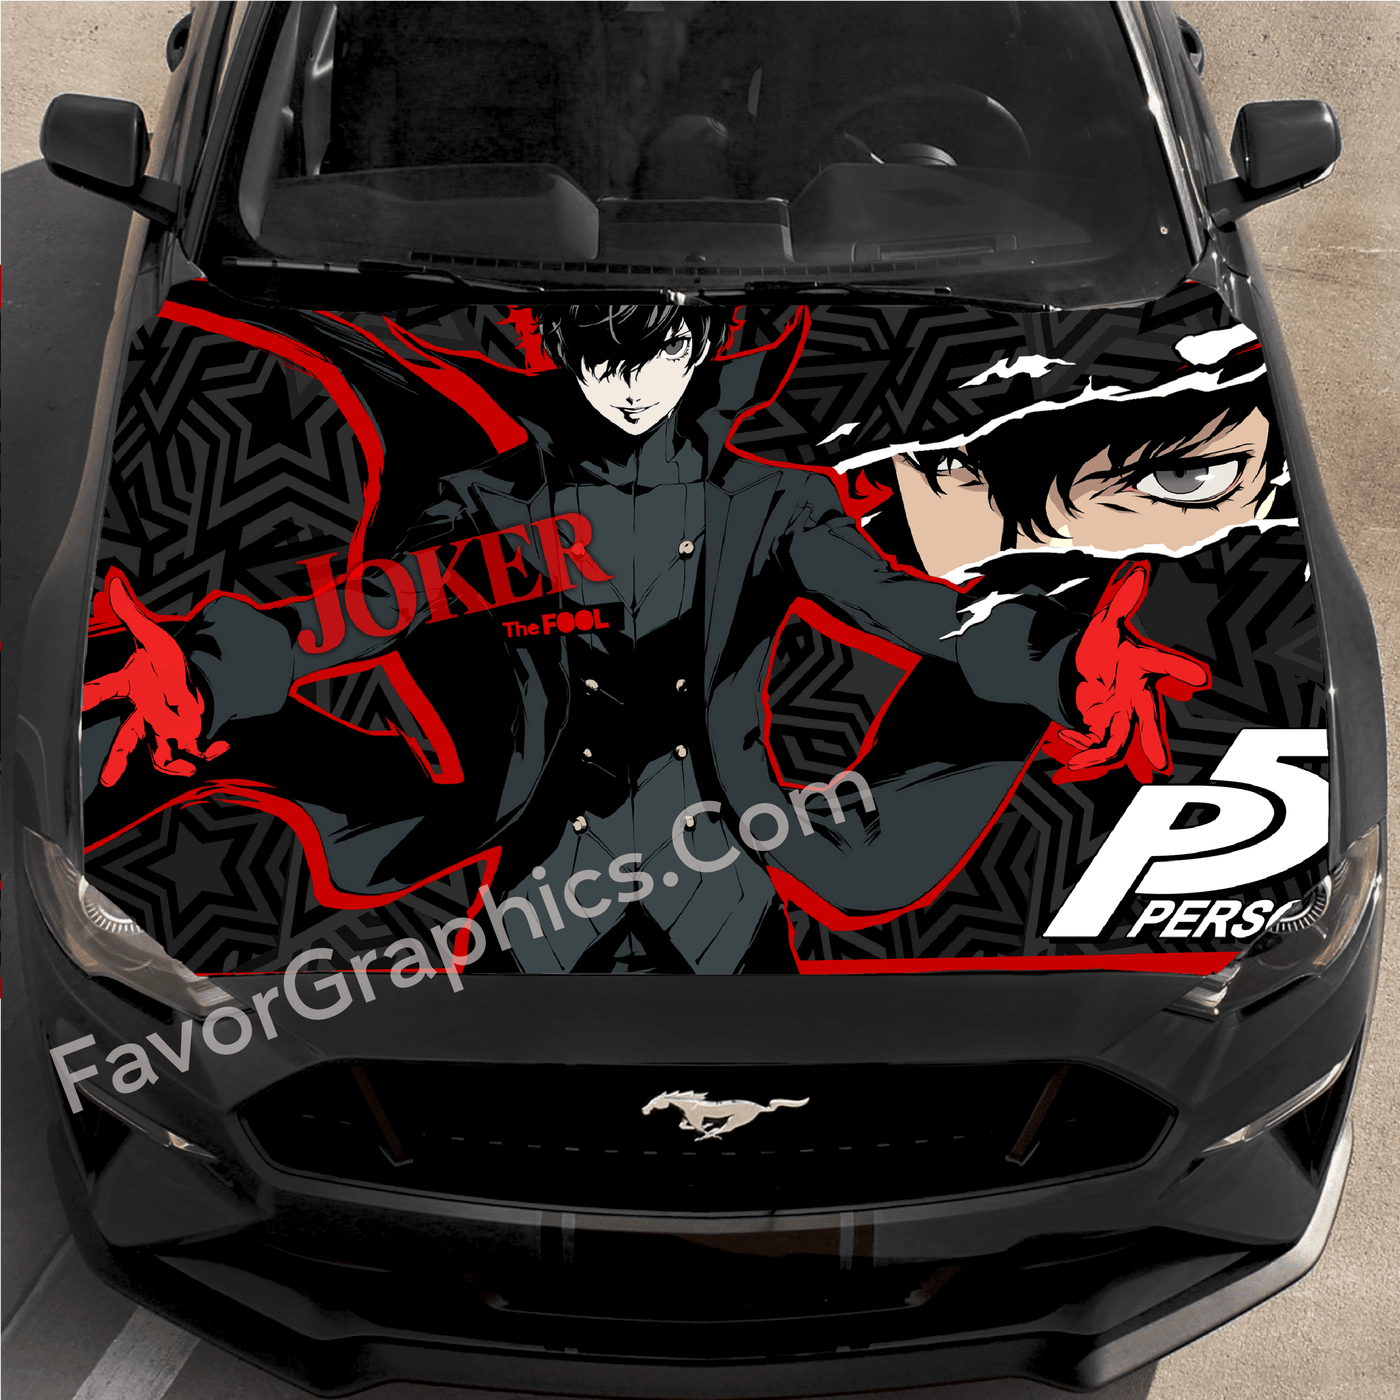 SEXY ANIME CAR Hood Wrap Decal Vinyl Sticker Full Color Graphic Fit Any Car  Z $65.00 - PicClick